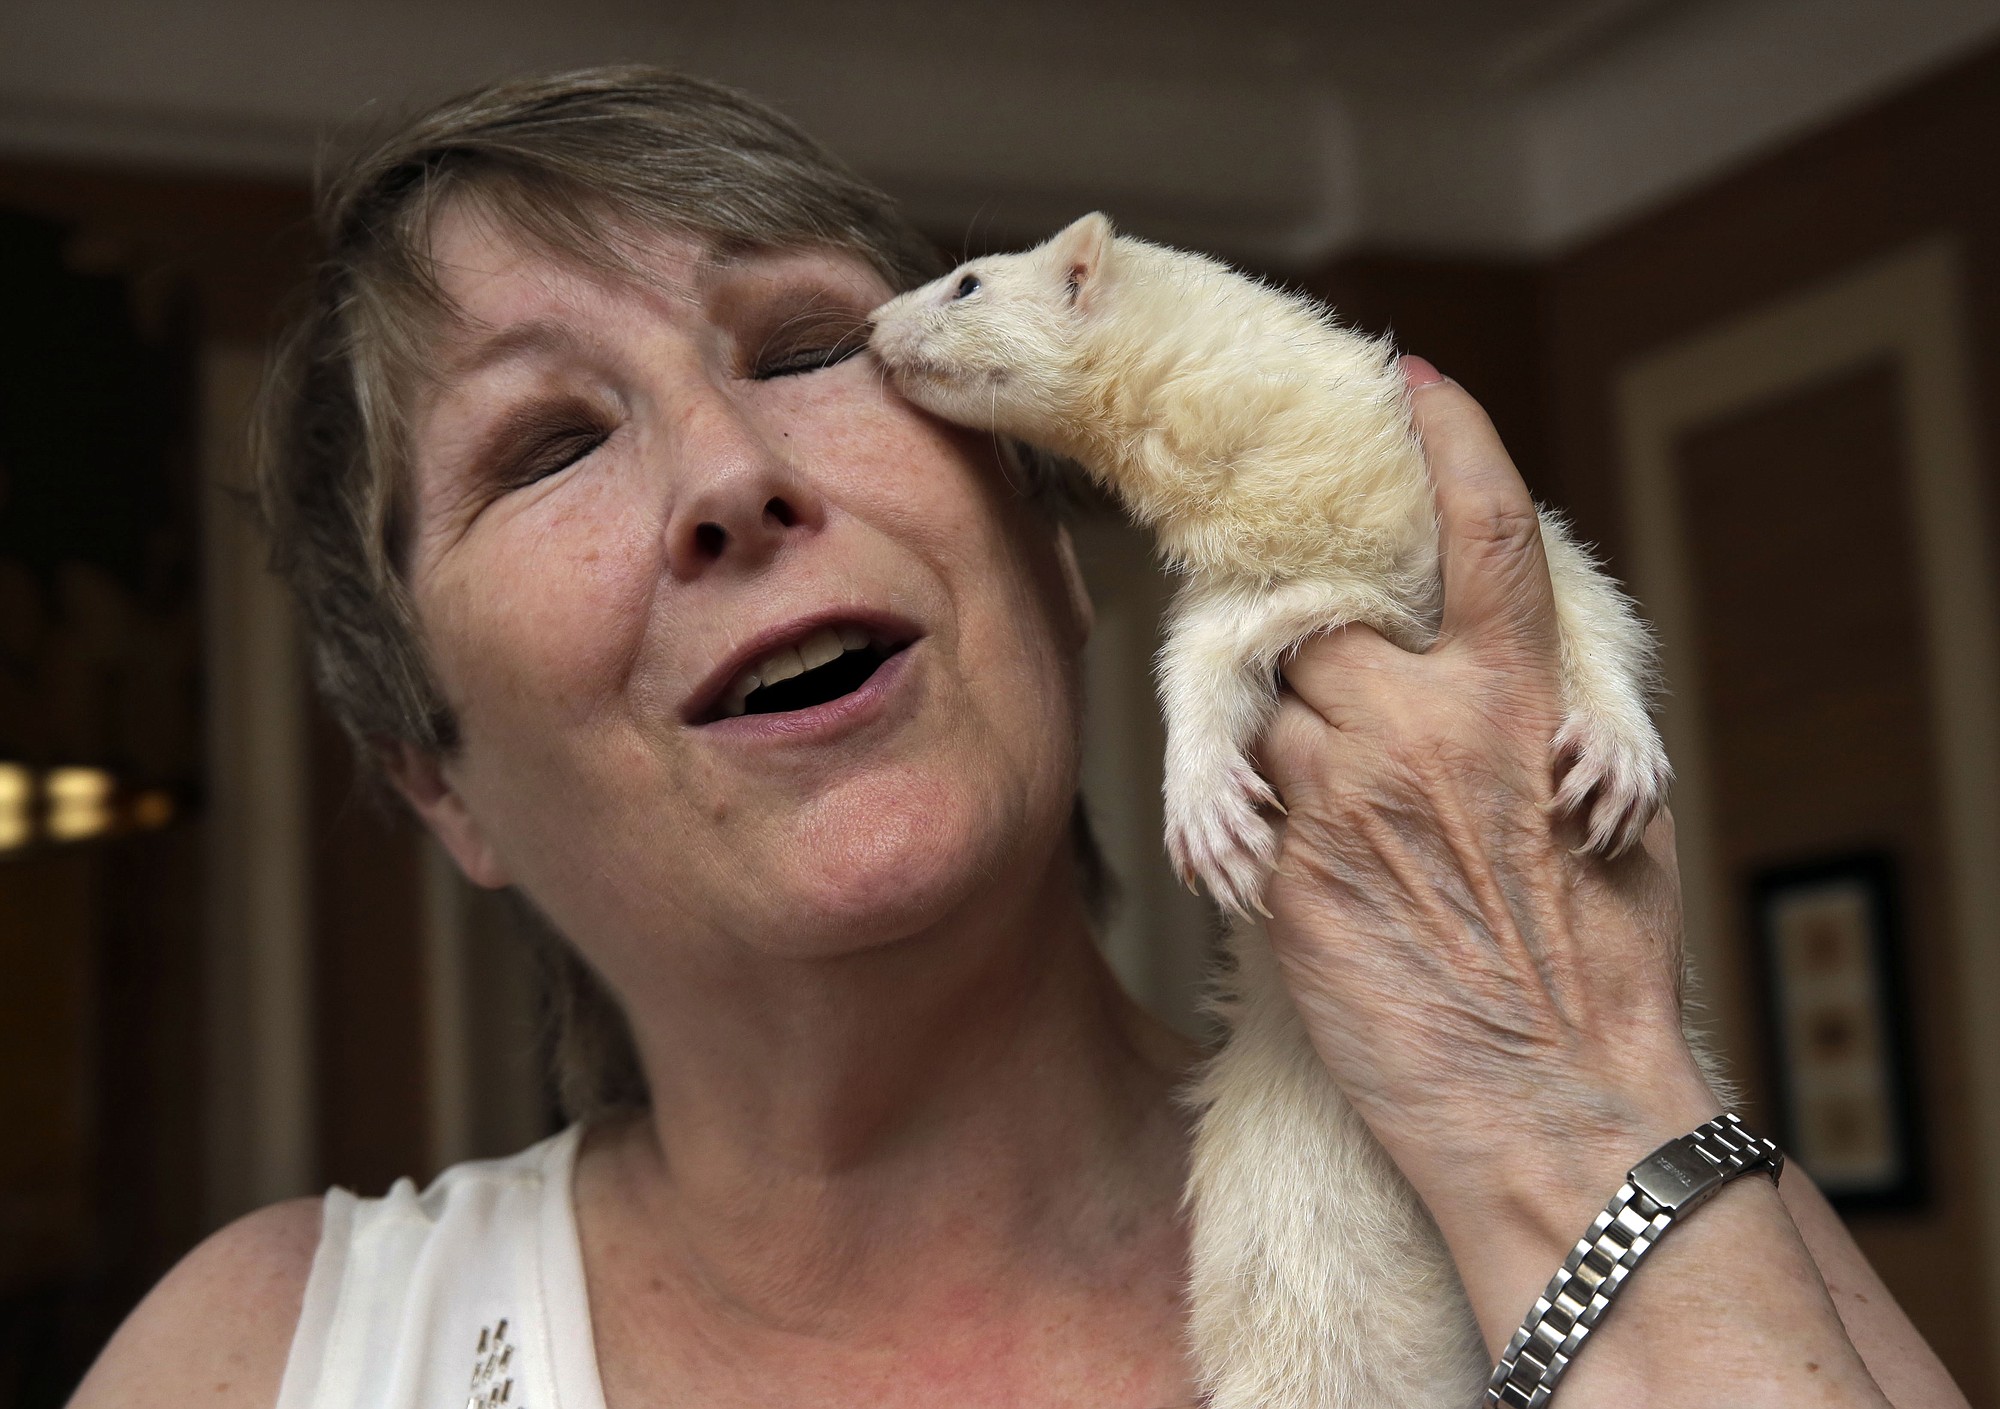 Candace Lucas poses for photos with her pet ferret Tink.